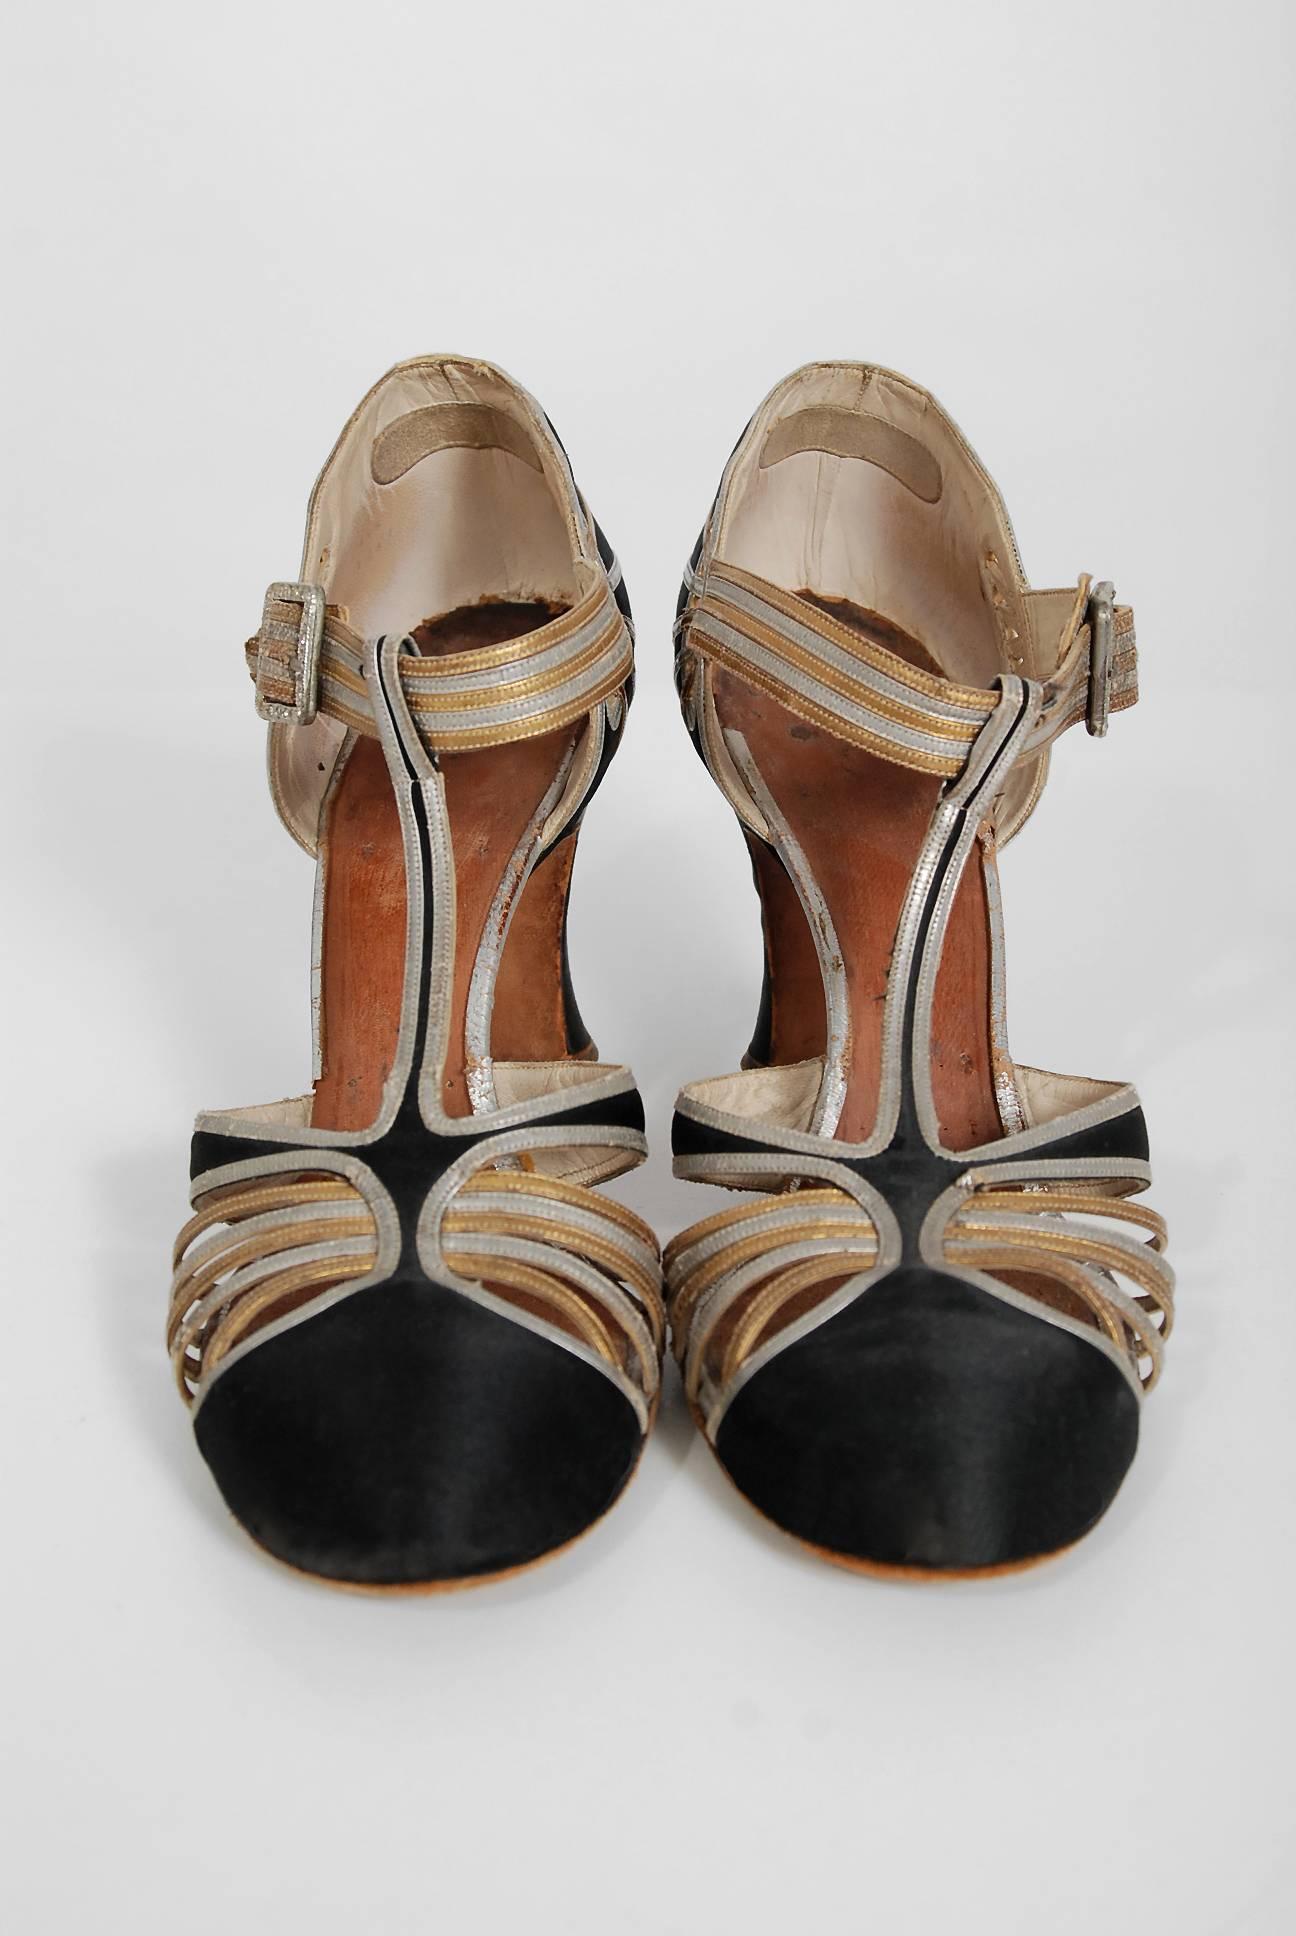 Stunning pair of authentic metallic leather and silk-satin flapper dance shoes dating back to the mid 1920's. The rising hemlines of this era focused attention on the exposed leg and foot. During this extravagant time, the demand for luxury shoes